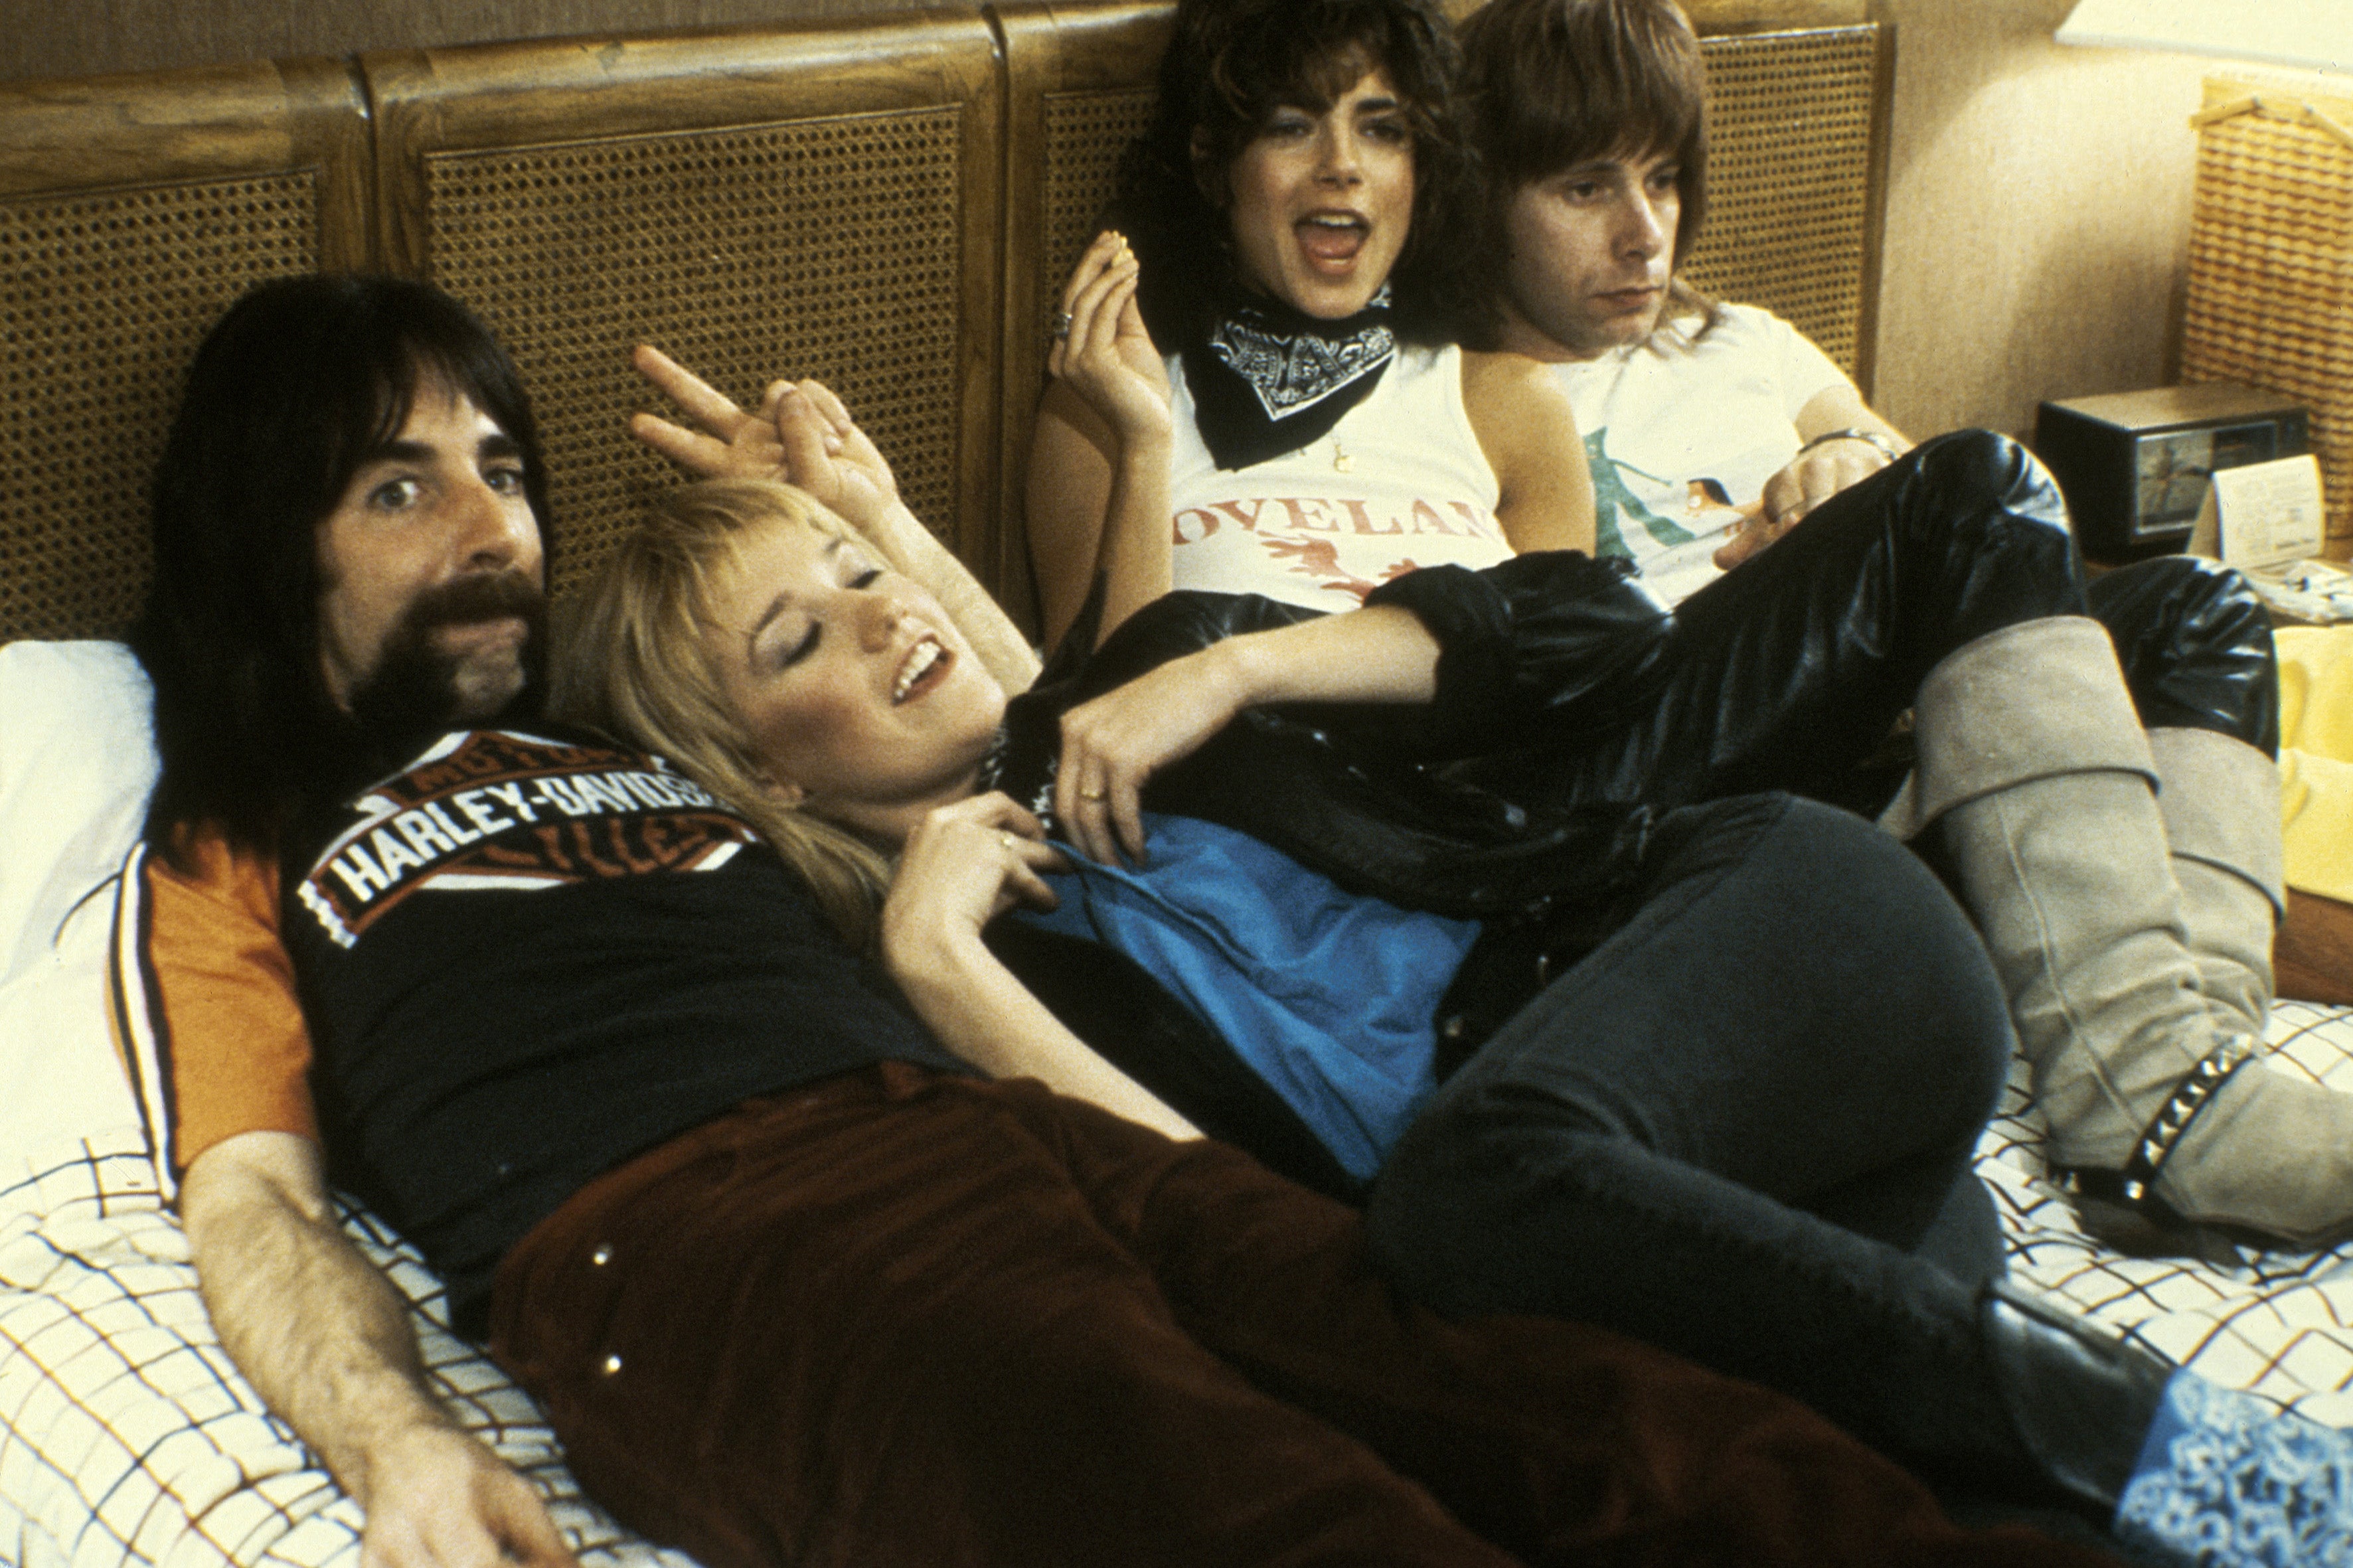 ‘This is Spinal Tap’ has endured as one of the finest comedy films ever made